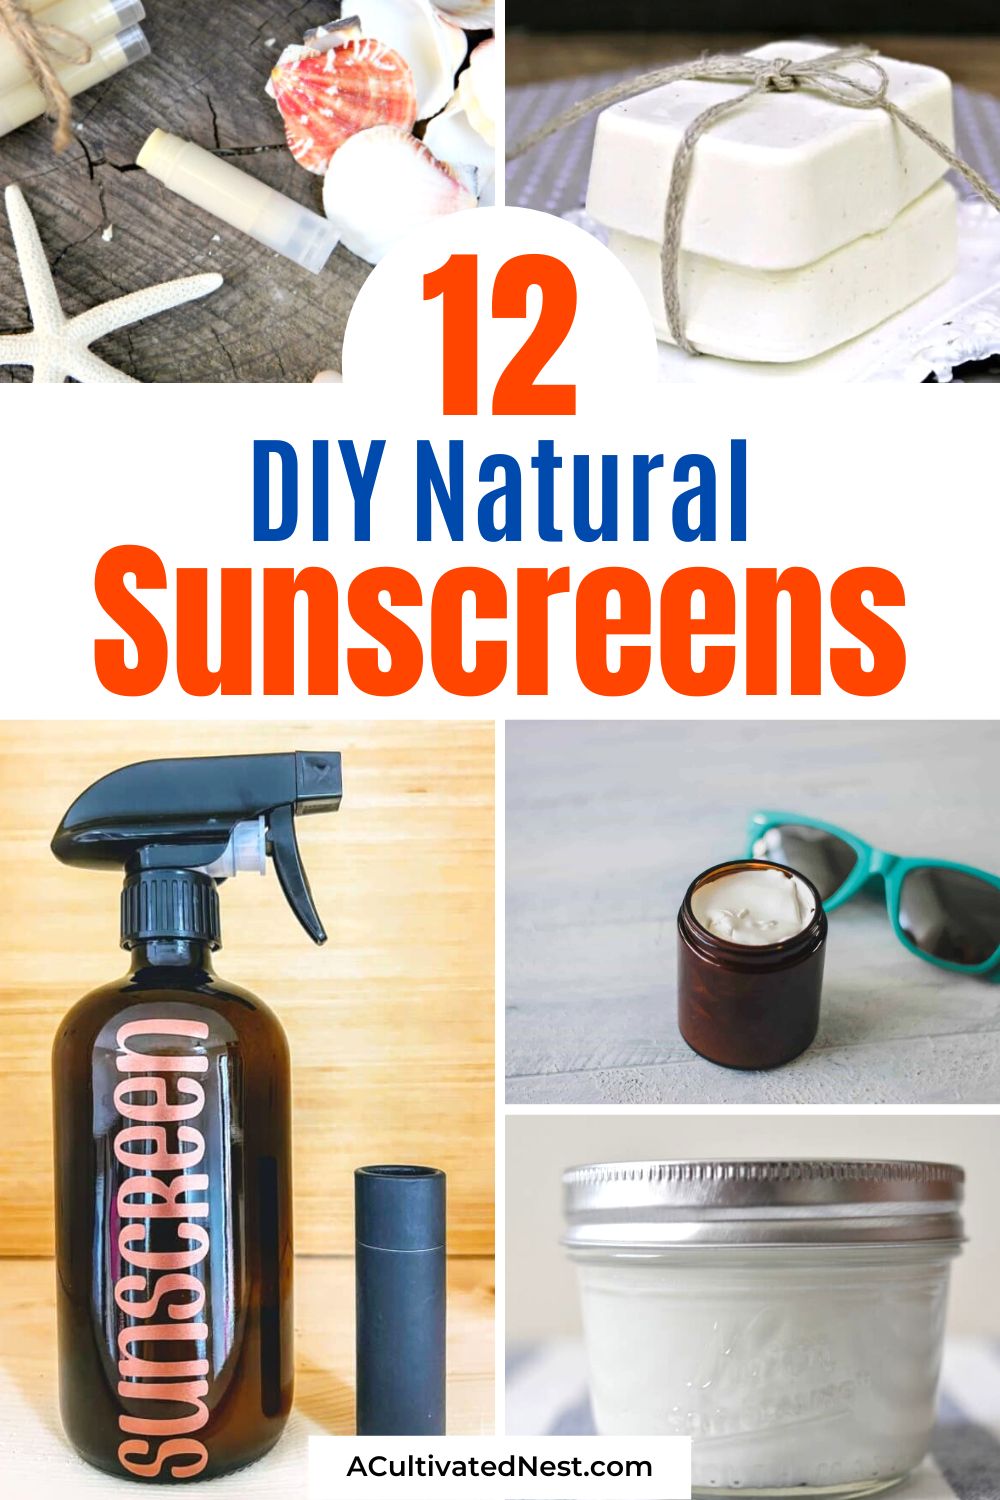 12 DIY Natural Sunscreen Recipes- Say goodbye to commercial sunscreens and hello to homemade goodness! Discover these amazing DIY natural sunscreen recipes that provide sun protection without the harmful chemicals! | #DIYBeauty #sunscreen #sunblock #NaturalSkincare #ACultivatedNest